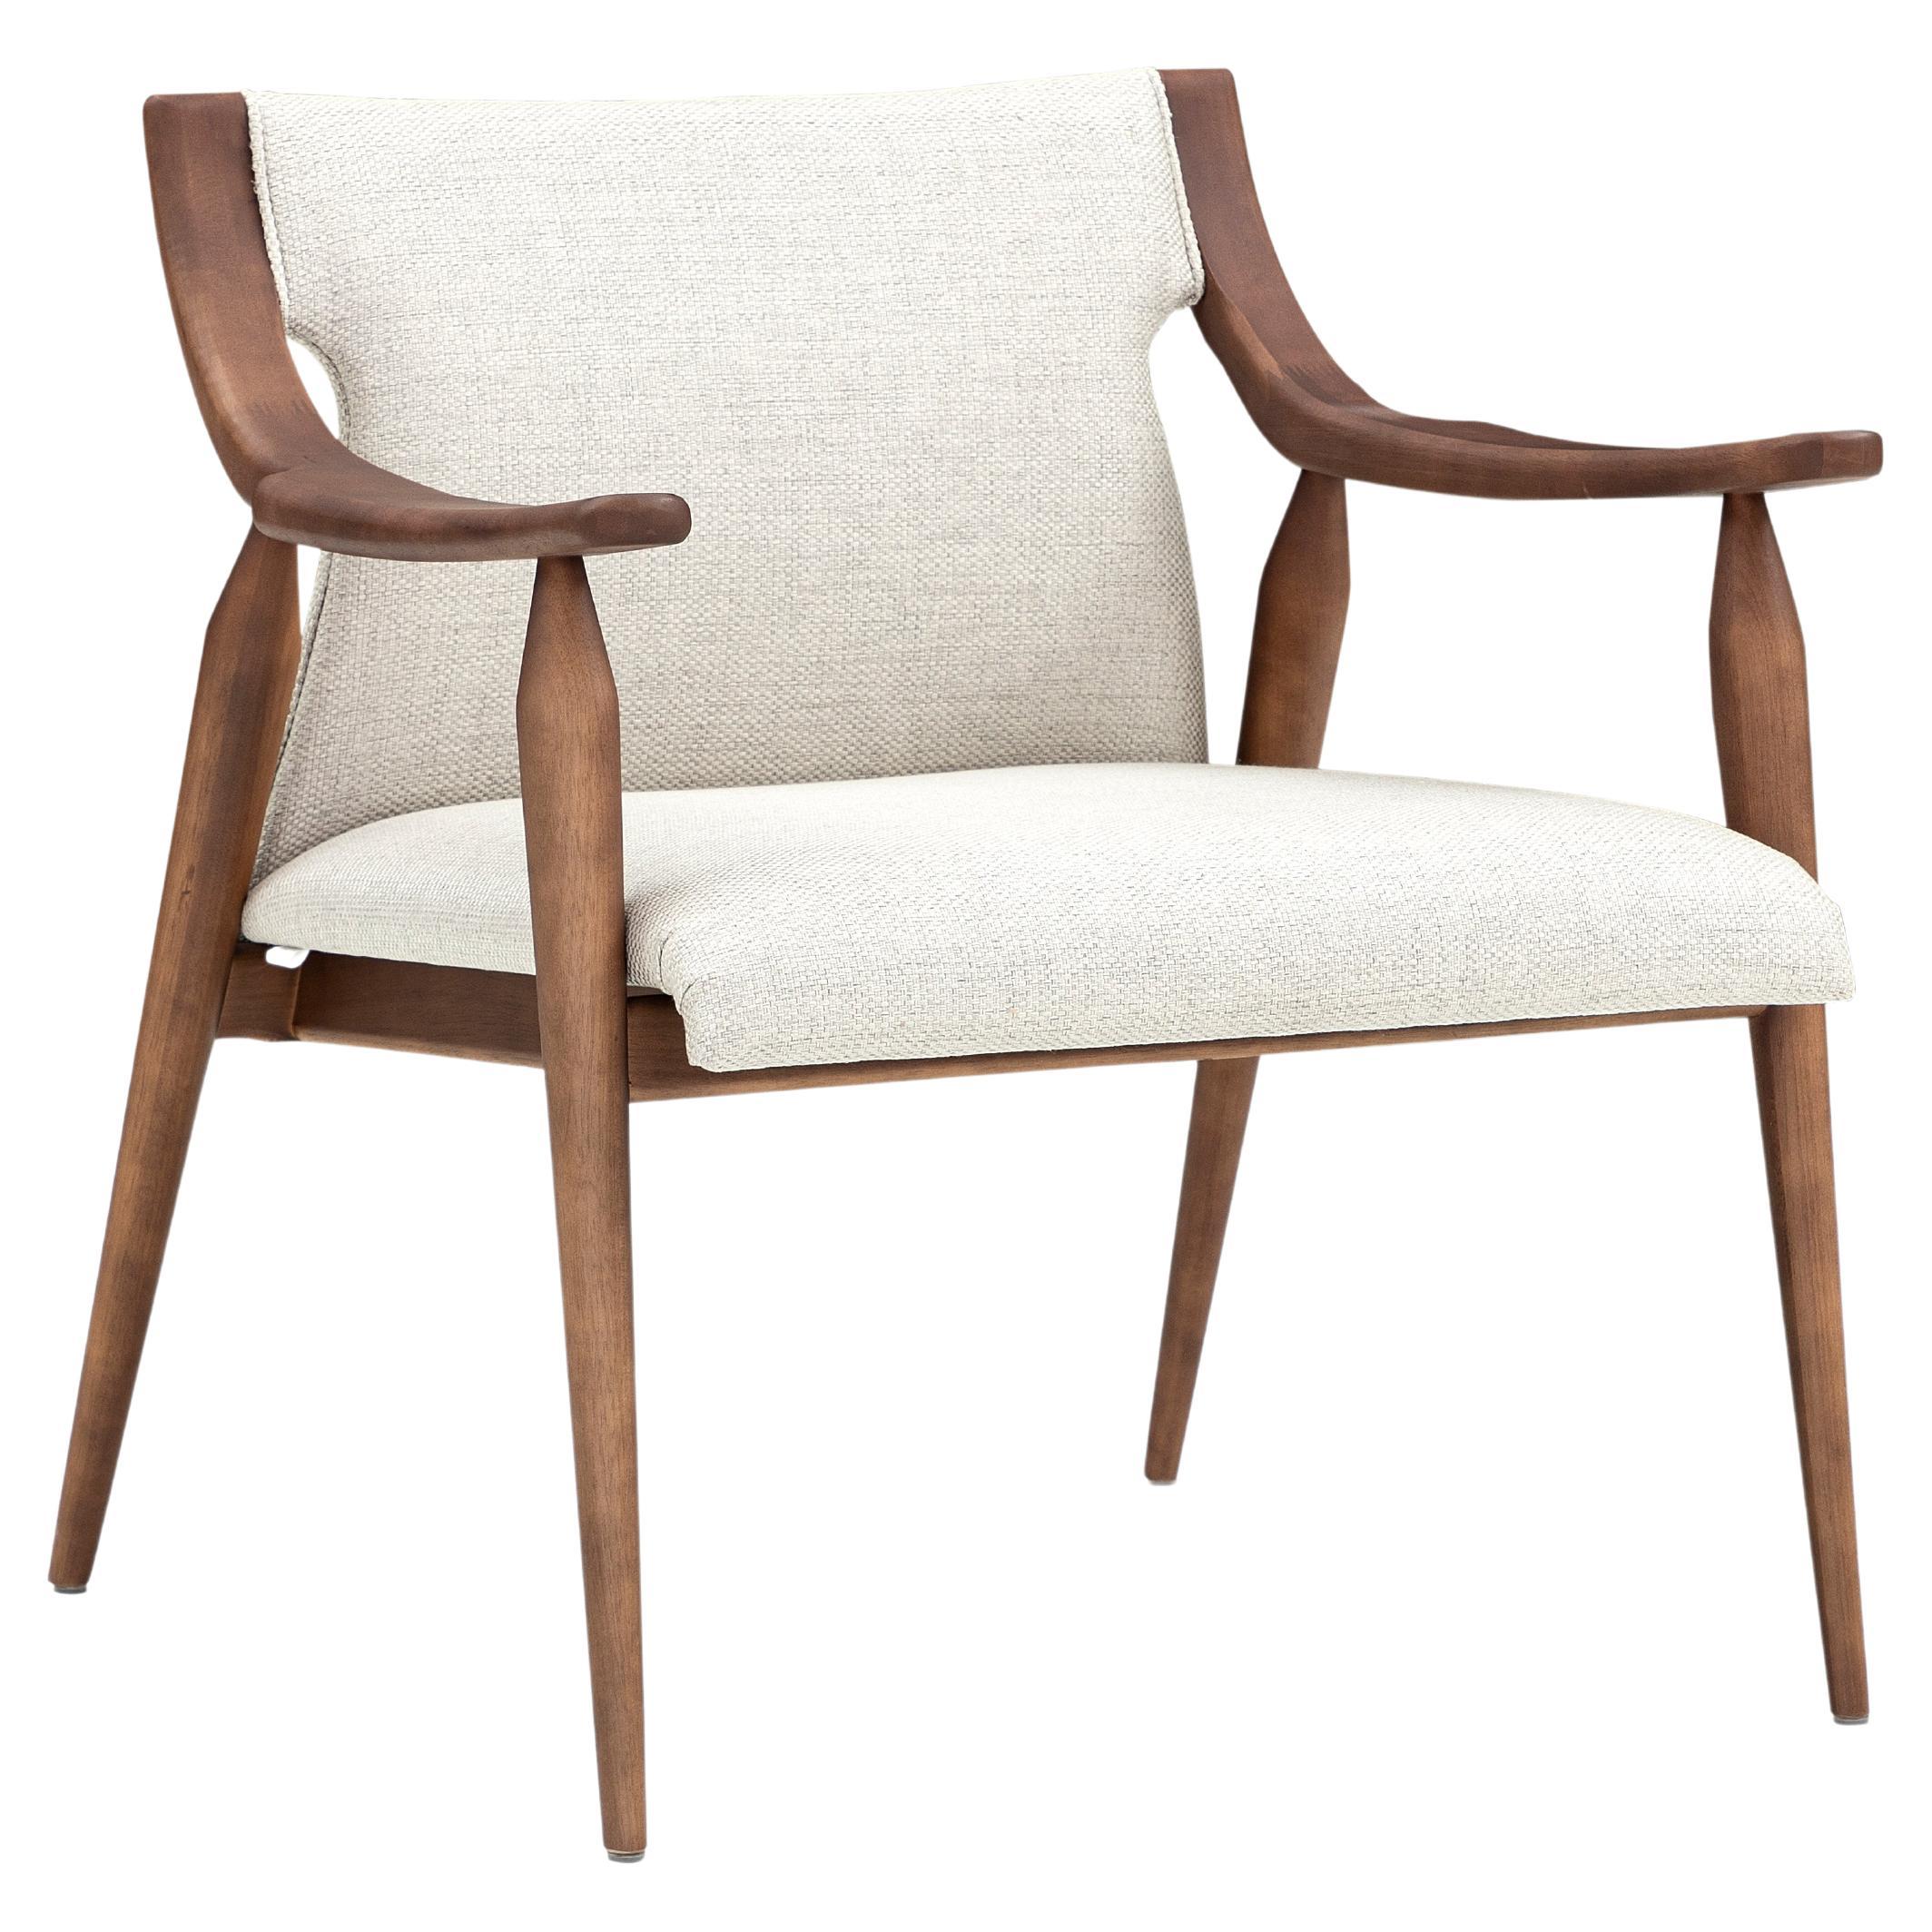 Mince Armchair Featuring Curved Arms and Spindle Legs in Walnut Wood Finish For Sale